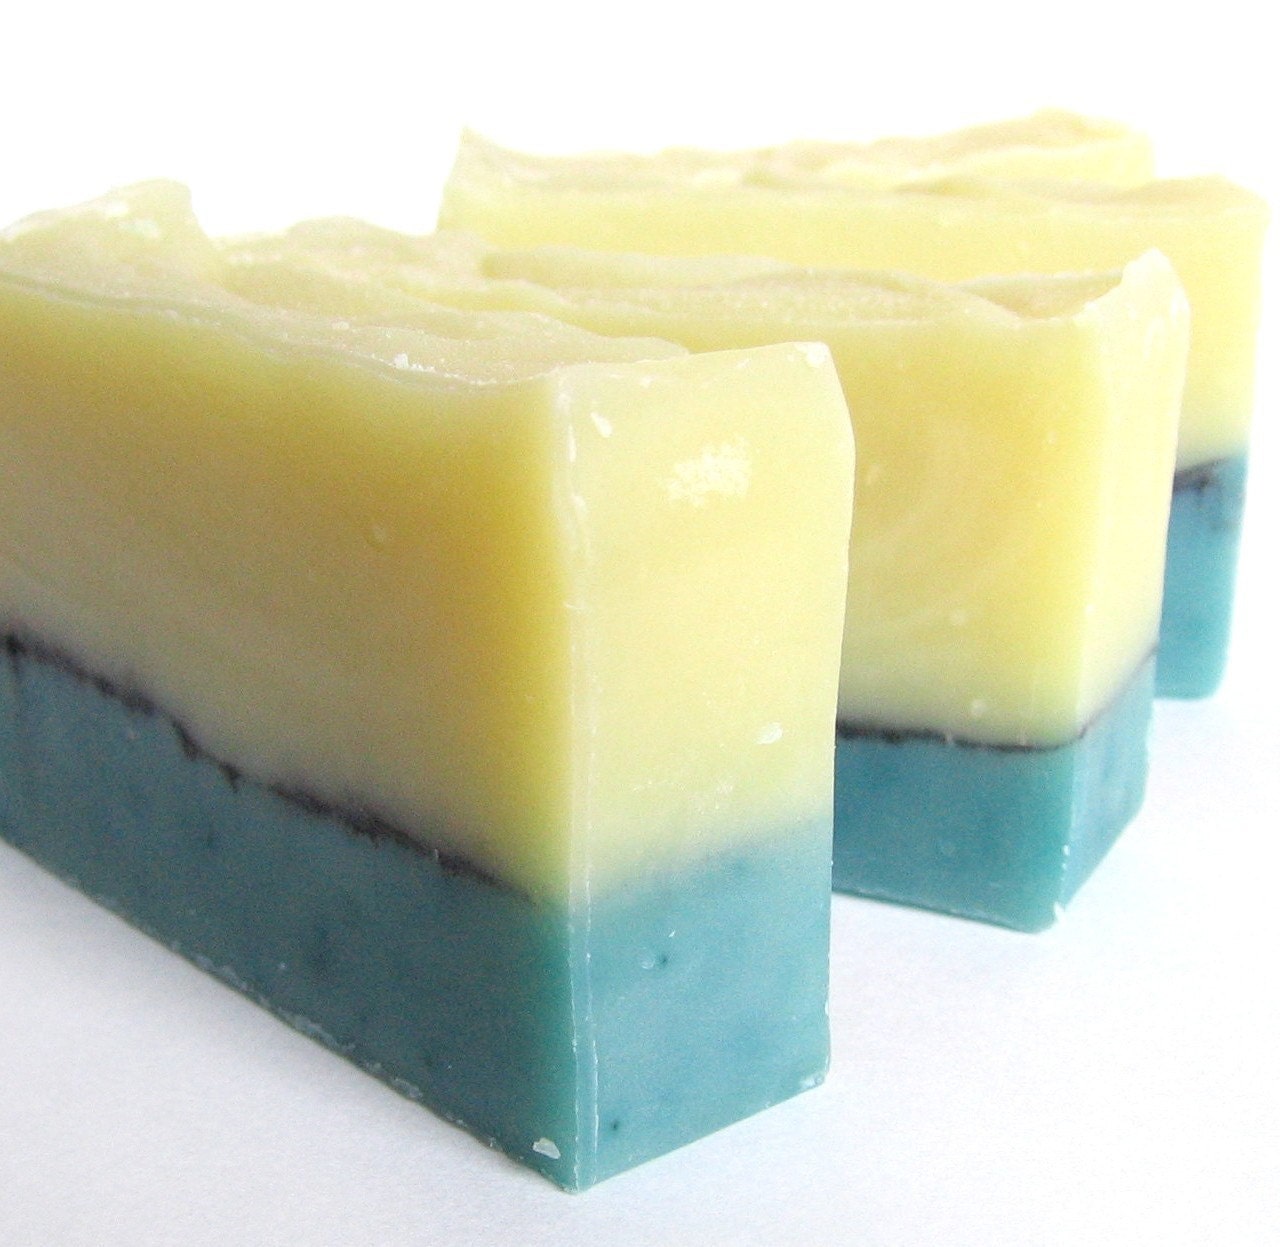 Vetyver Soap with Sweet Almond Oil and Shea Butter